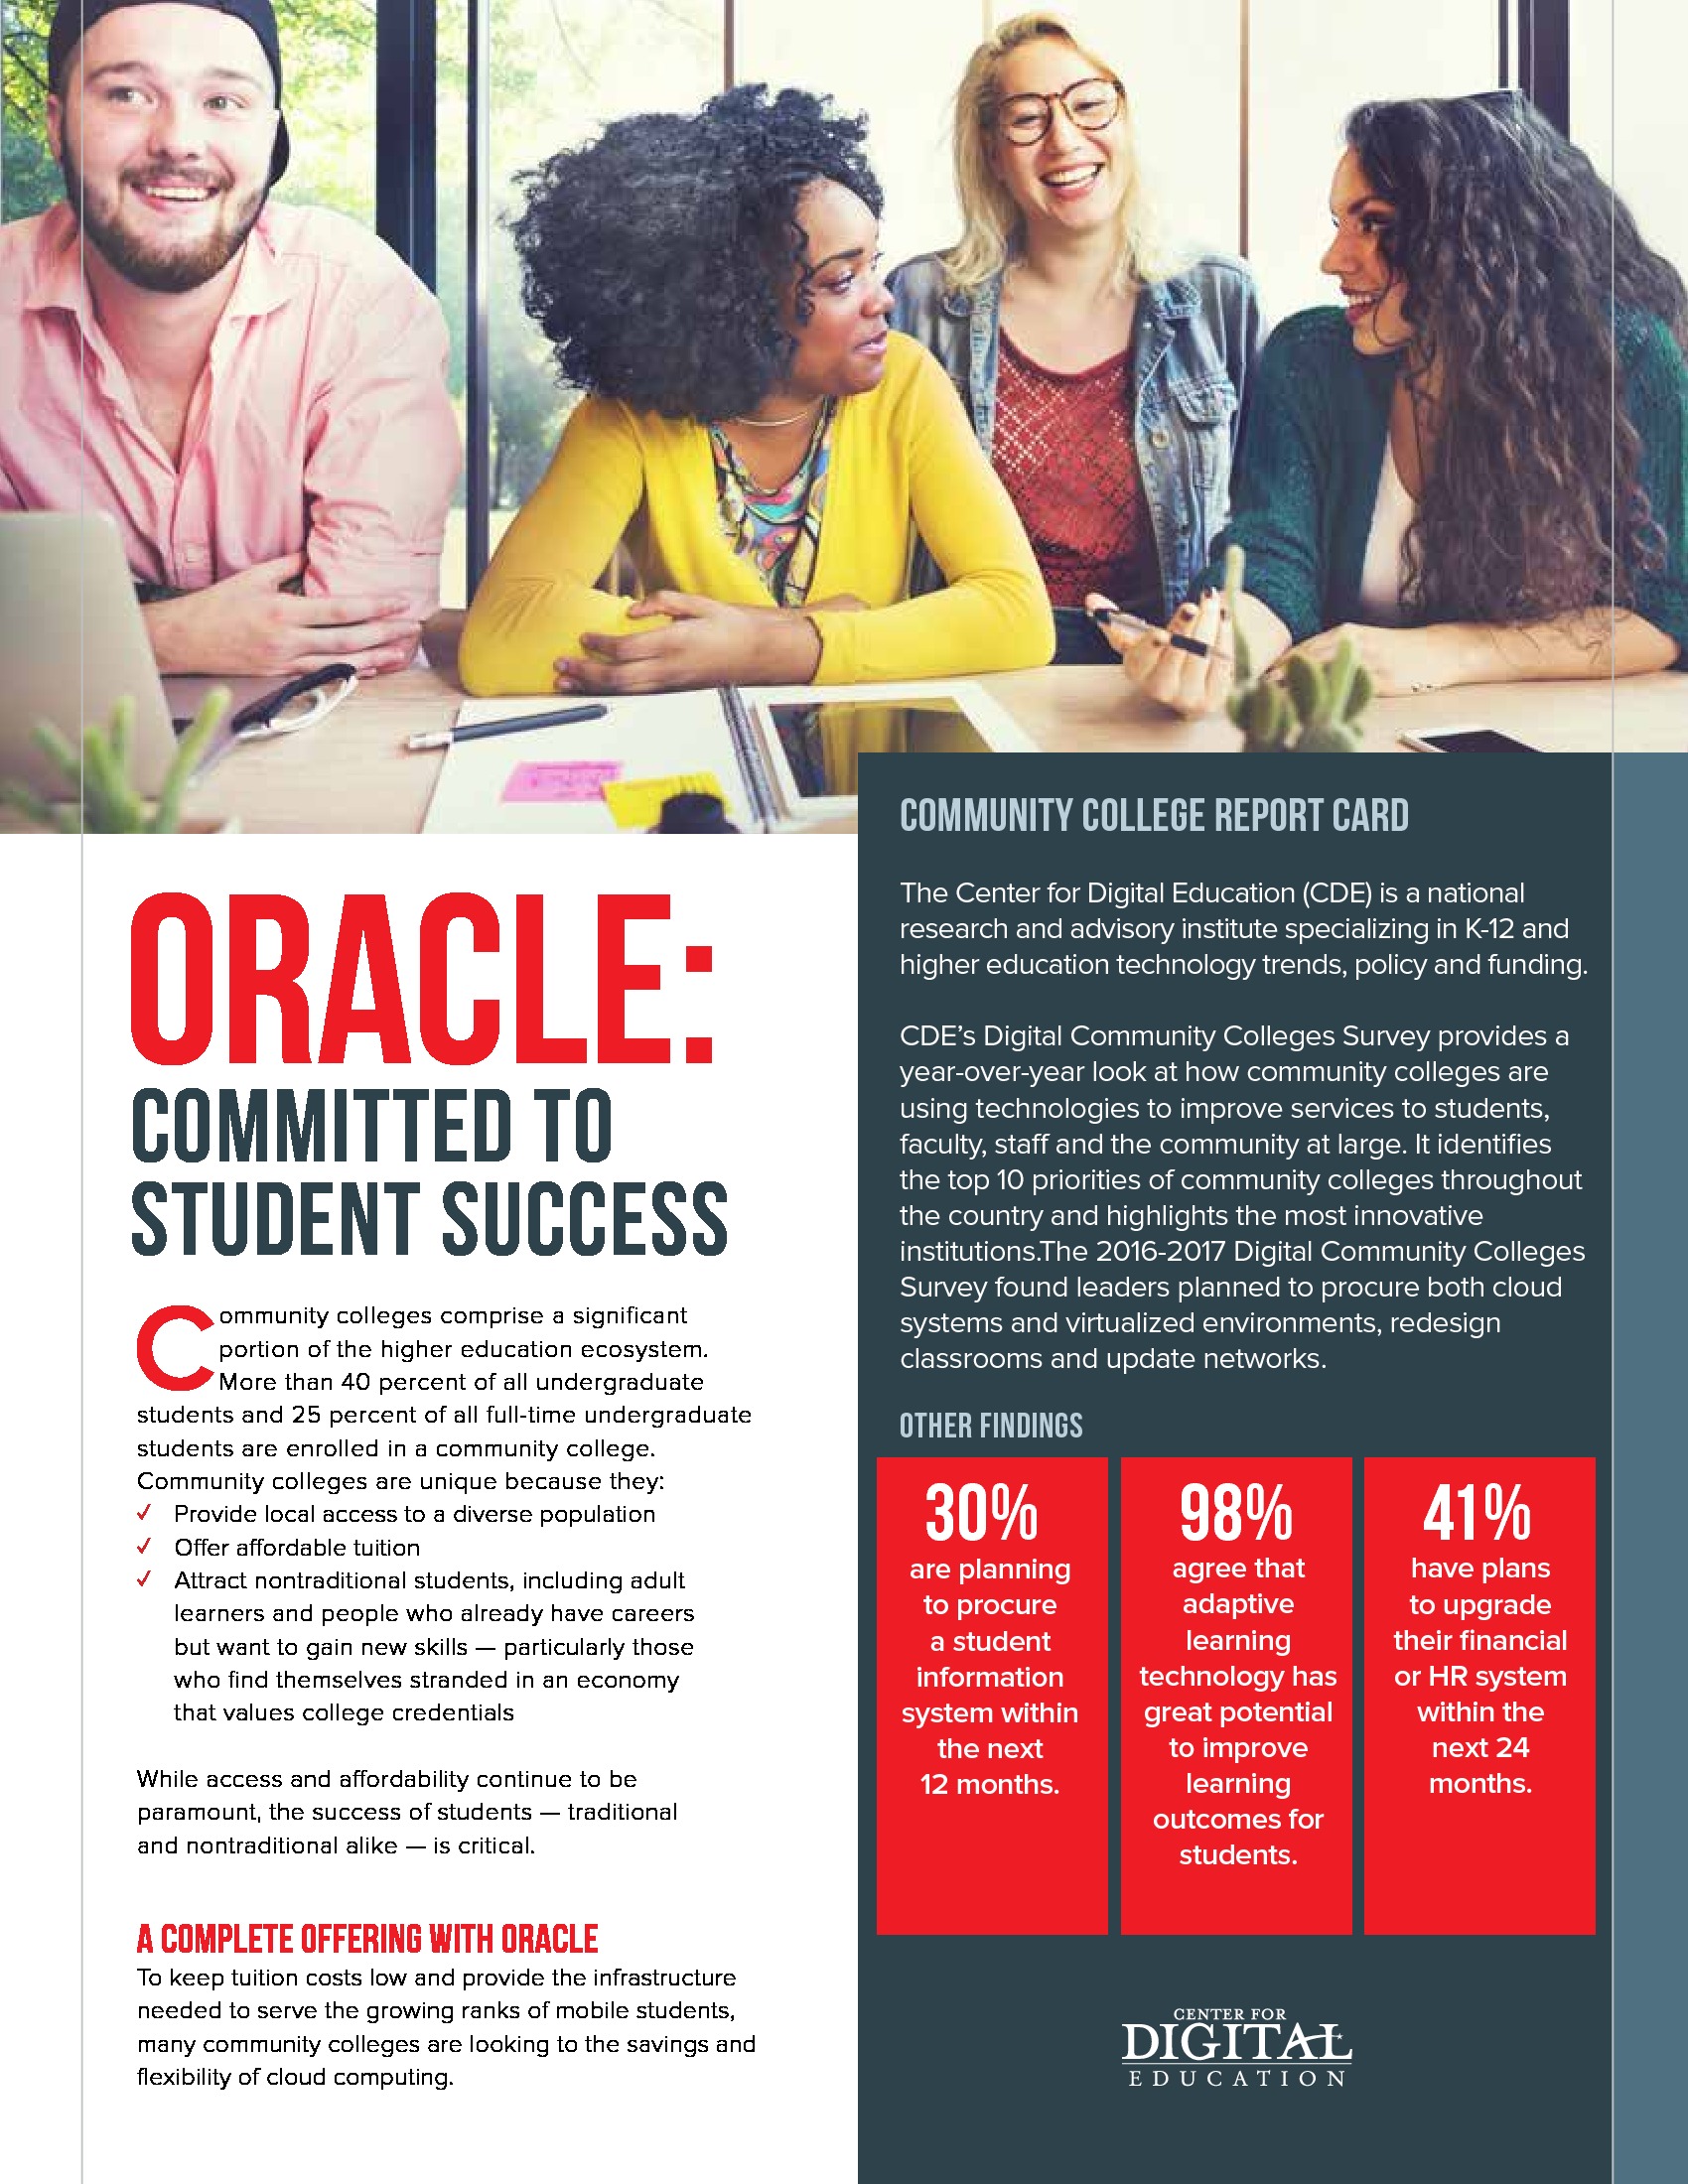 Oracle: Committed to Student Success